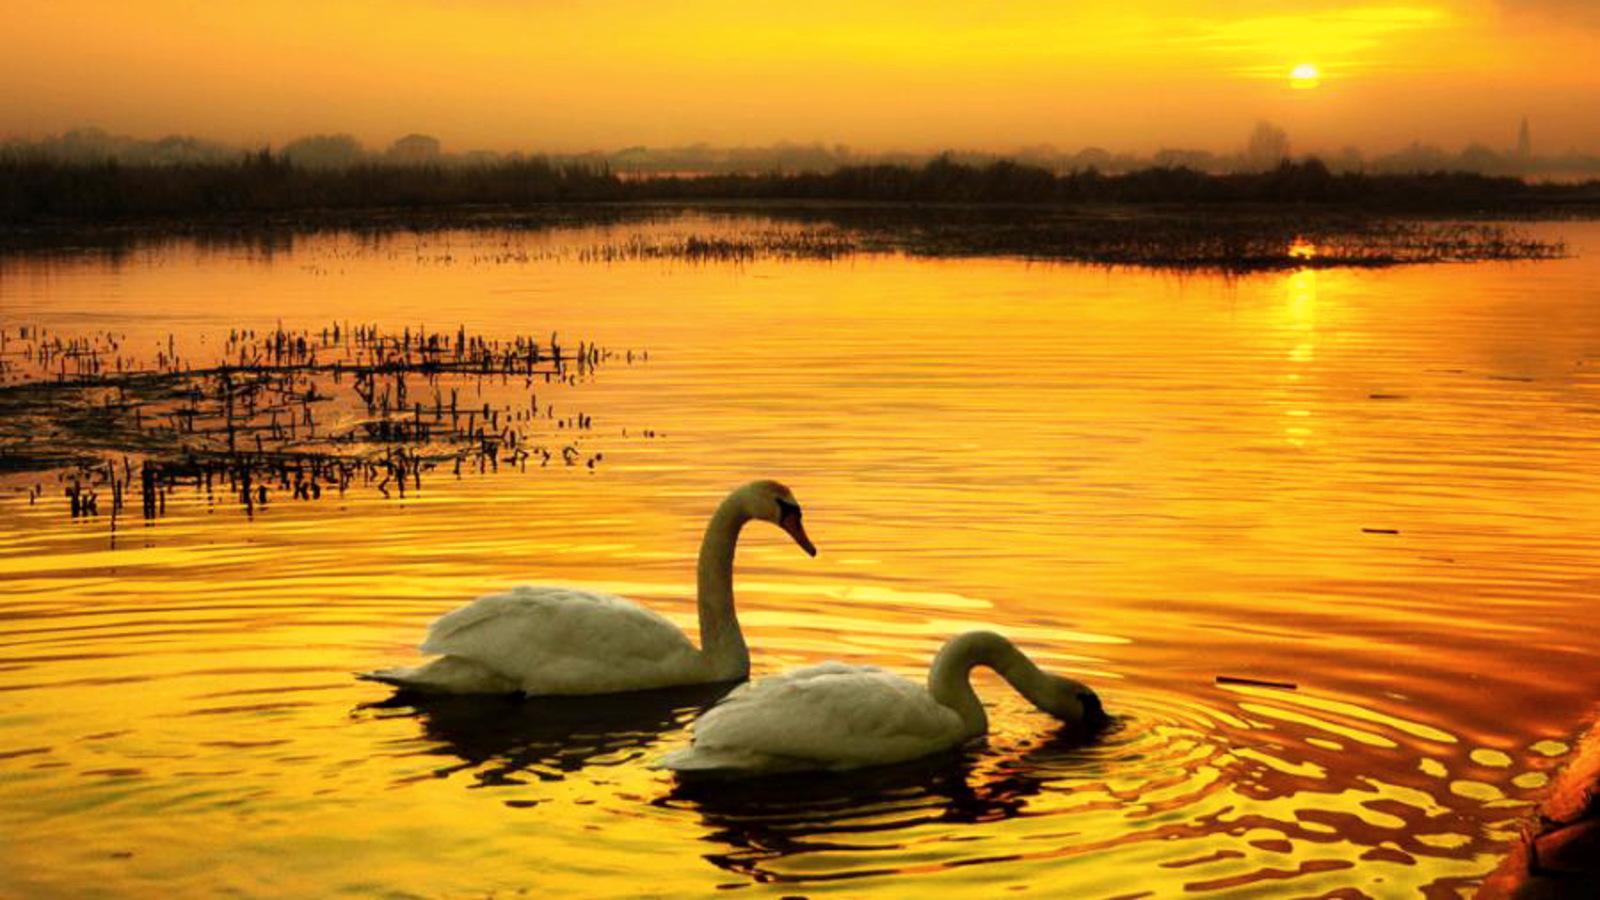 Swan Lake Wallpaper and Background Imagex900